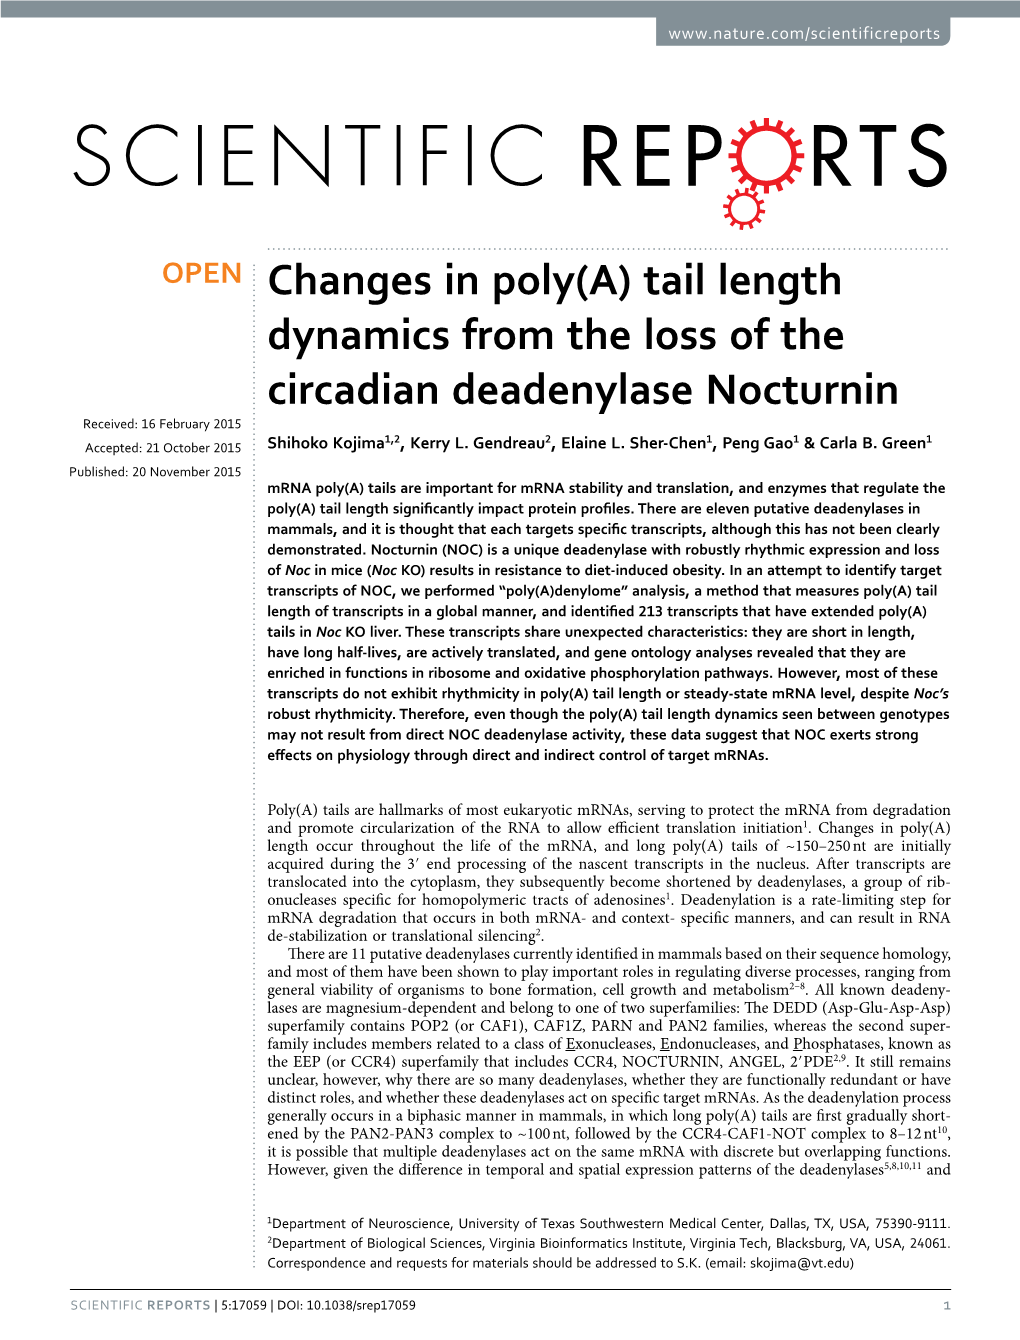 Changes in Poly(A) Tail Length Dynamics from the Loss of the Circadian Deadenylase Nocturnin